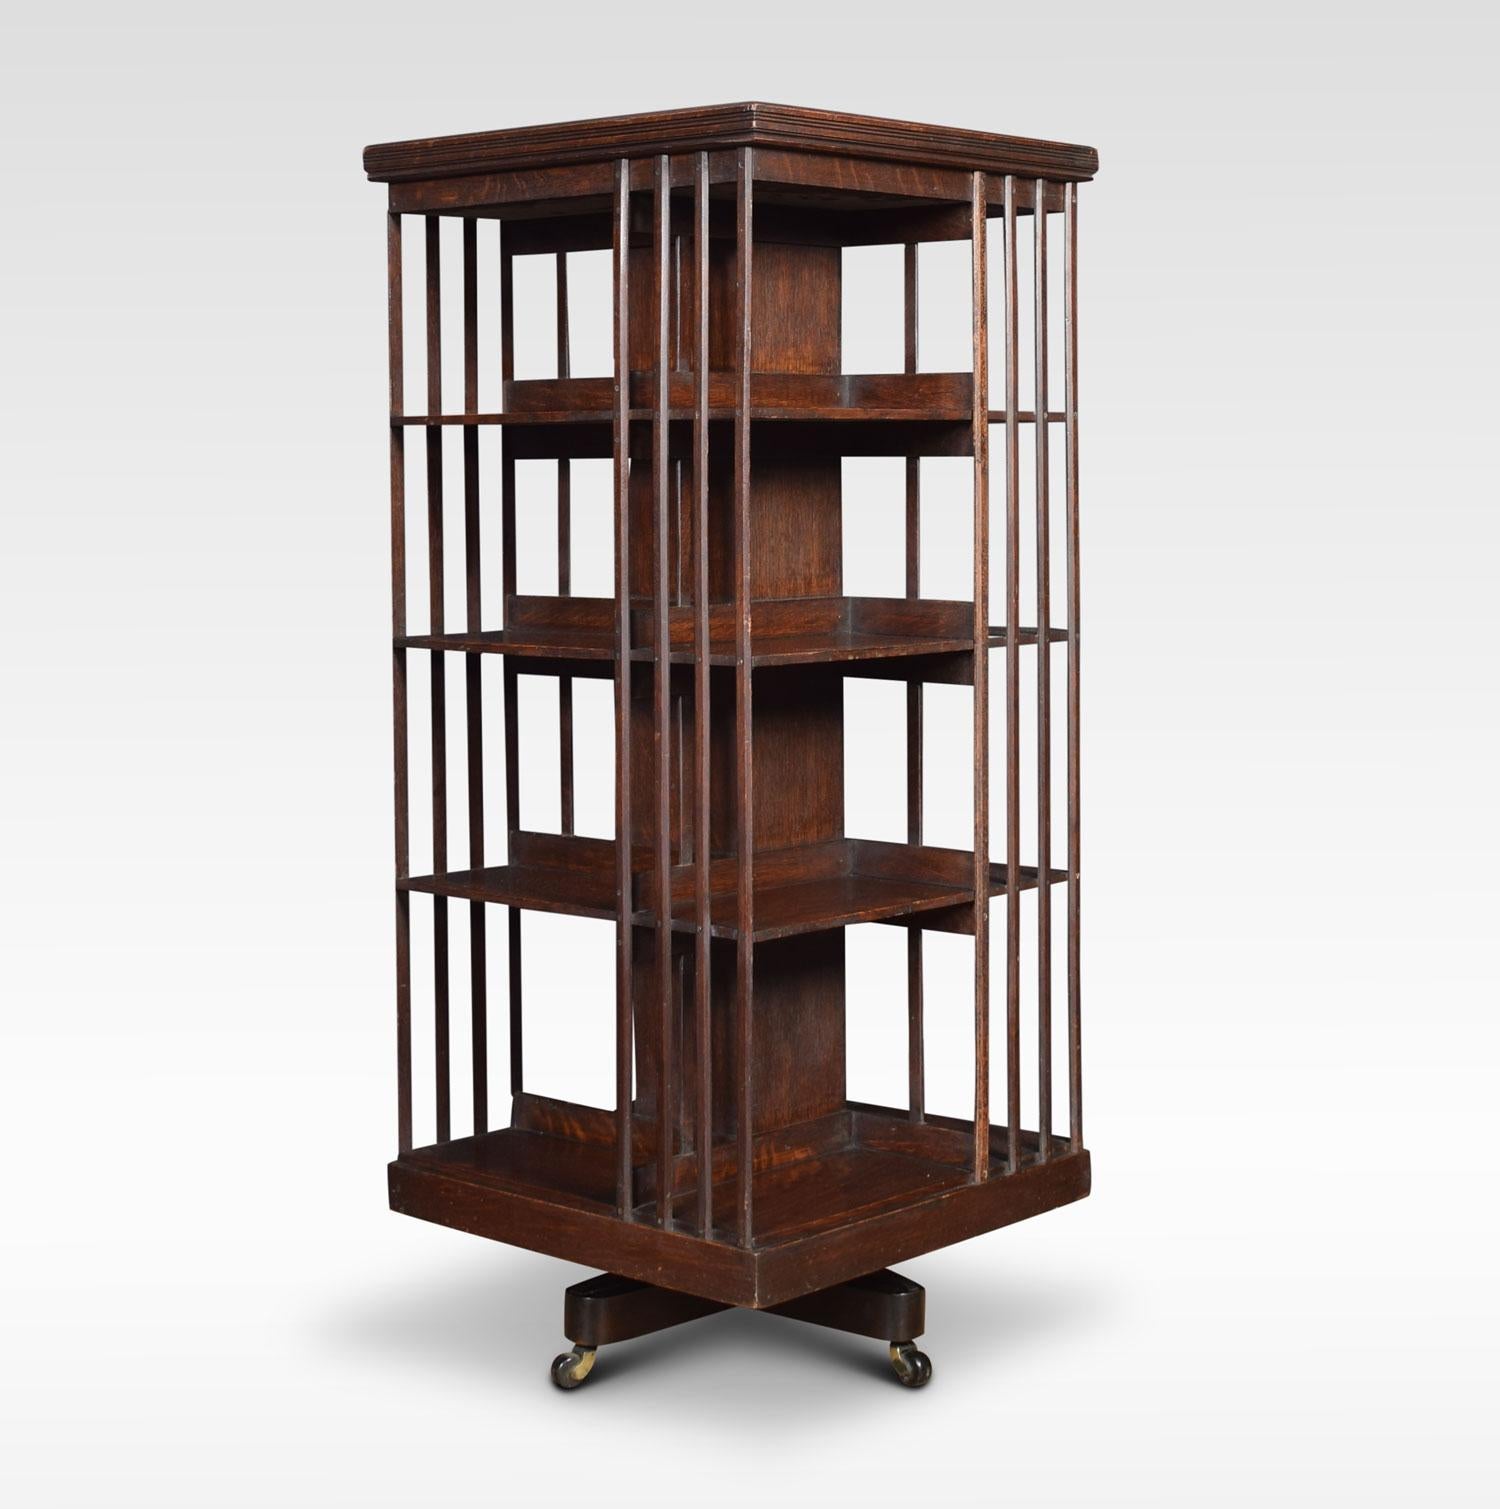 Tall oak revolving bookcase the square moulded top above four tiers with an arrangement of shelves. Raised up on metal cruciform base terminating in ceramic castors.
Dimensions
Height 54.5 Inches
Width 24 Inches
Depth 24 Inches